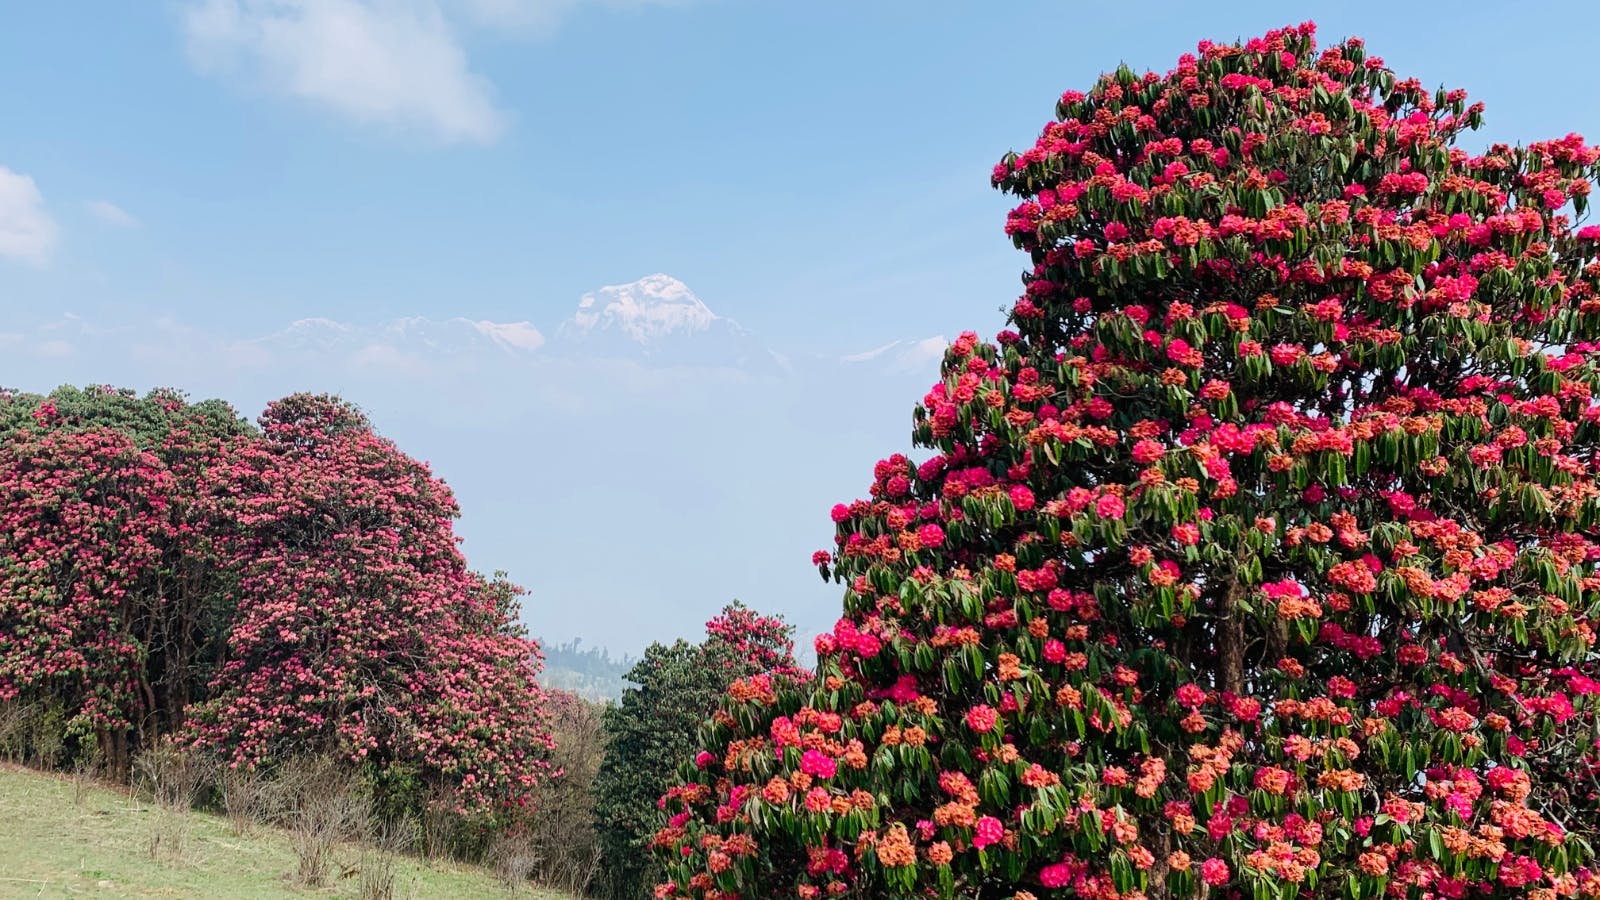 Rhododendron forest blooming along the trail during springtime